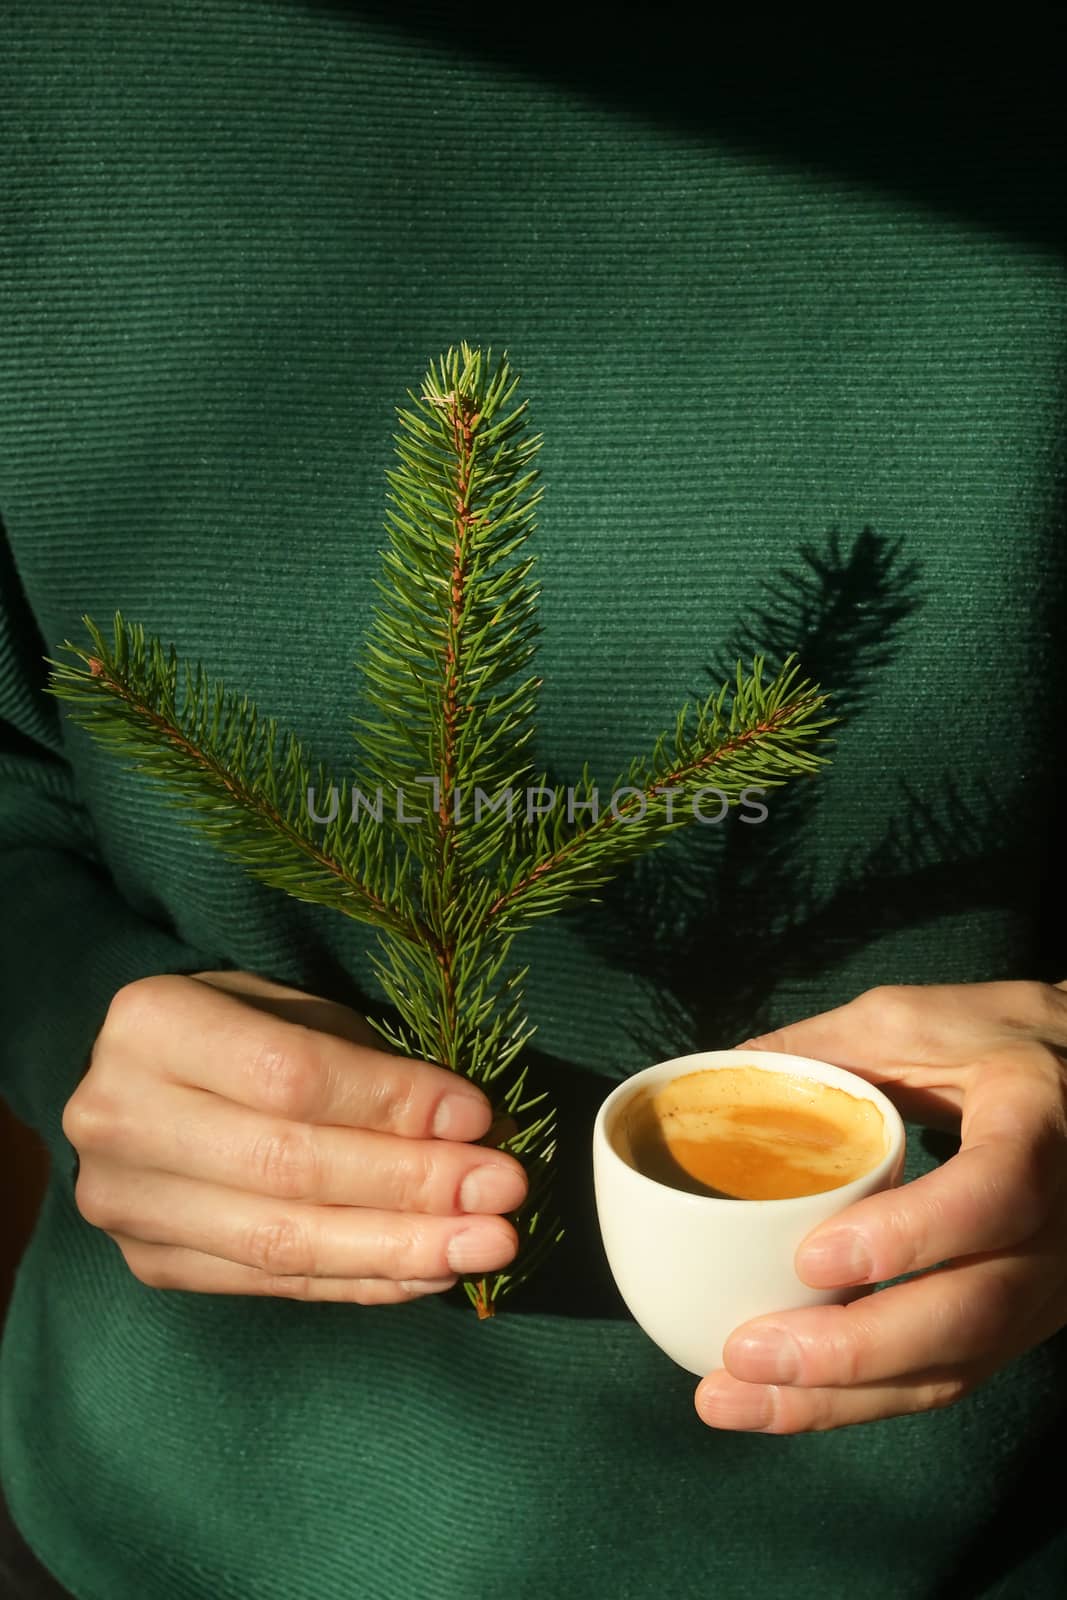 Woman is holding pine tree branch and an espresso cup